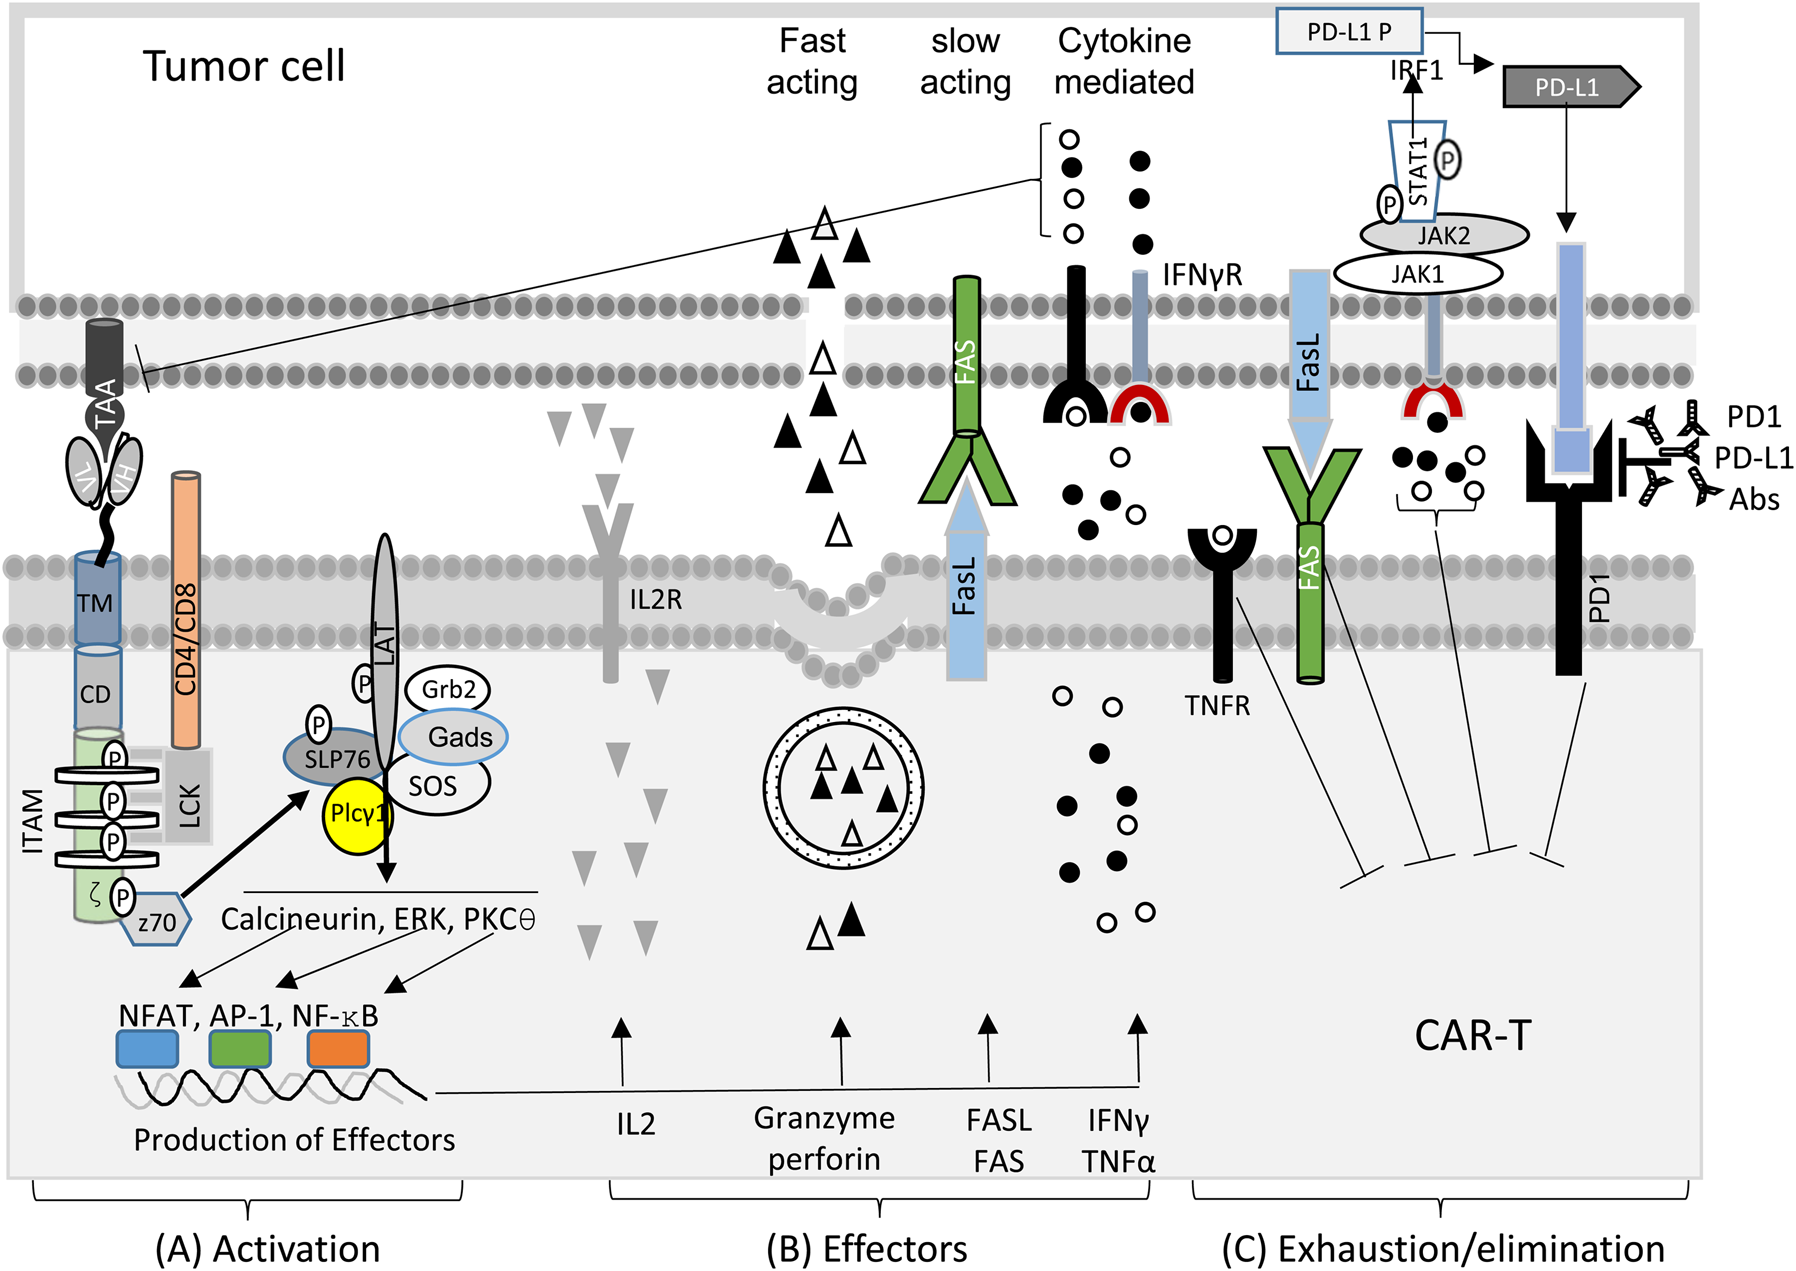 Transient rest restores functionality in exhausted CAR-T cells through  epigenetic remodeling